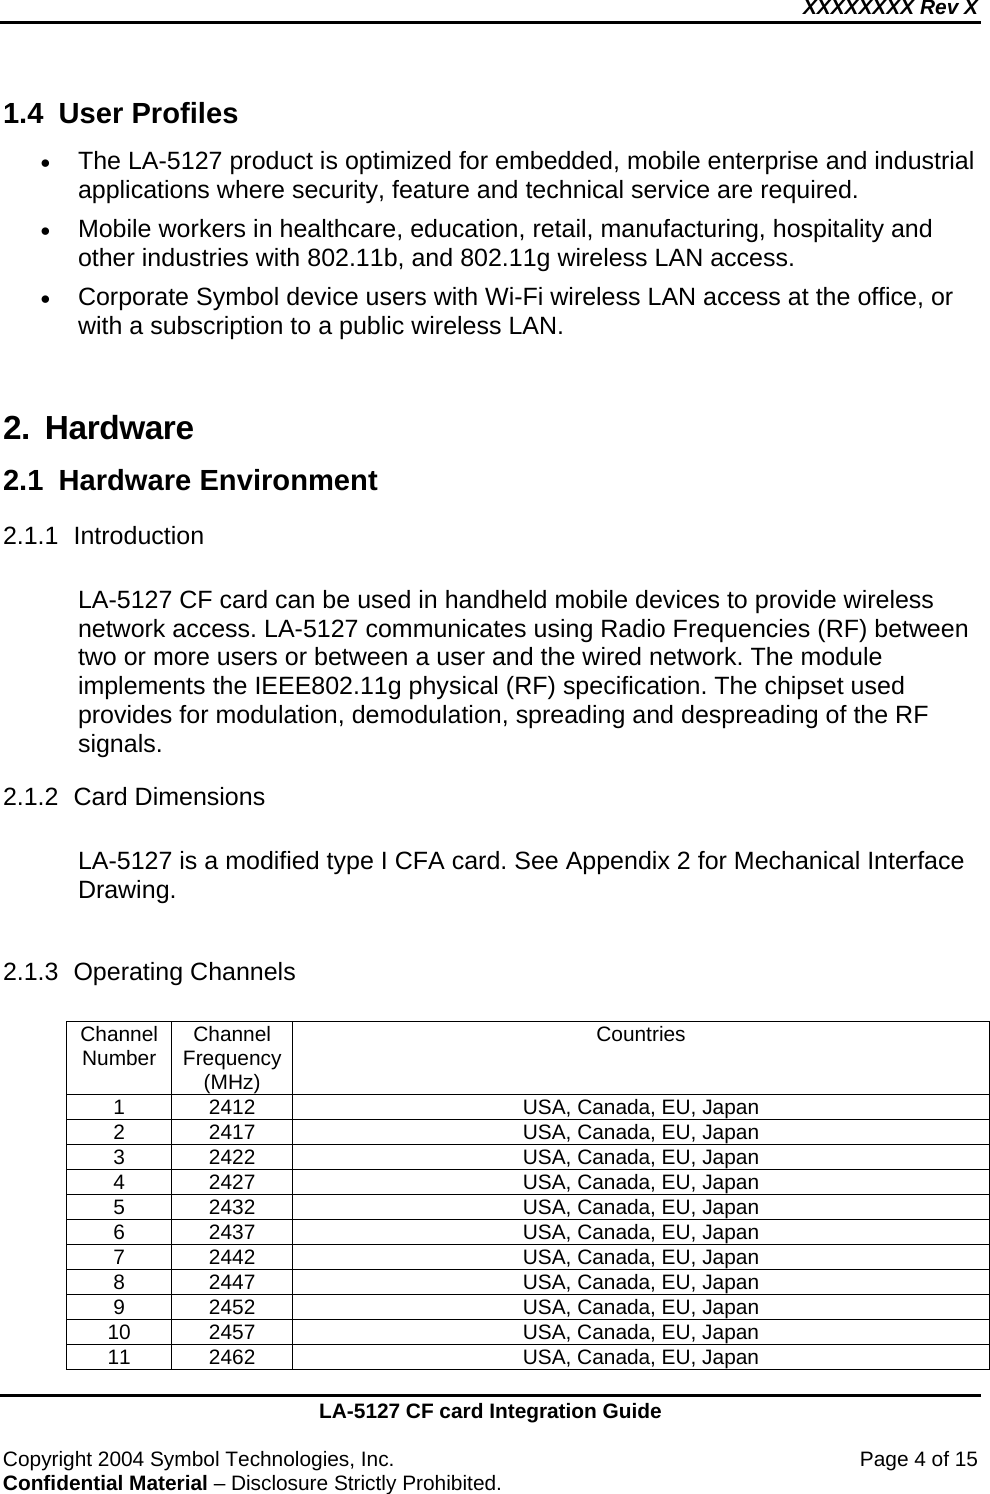 XXXXXXXX Rev X    LA-5127 CF card Integration Guide  Copyright 2004 Symbol Technologies, Inc.    Page 4 of 15 Confidential Material – Disclosure Strictly Prohibited. 1.4  User Profiles  • The LA-5127 product is optimized for embedded, mobile enterprise and industrial applications where security, feature and technical service are required.  • Mobile workers in healthcare, education, retail, manufacturing, hospitality and other industries with 802.11b, and 802.11g wireless LAN access.  • Corporate Symbol device users with Wi-Fi wireless LAN access at the office, or with a subscription to a public wireless LAN.  2. Hardware  2.1 Hardware Environment 2.1.1 Introduction   LA-5127 CF card can be used in handheld mobile devices to provide wireless network access. LA-5127 communicates using Radio Frequencies (RF) between two or more users or between a user and the wired network. The module implements the IEEE802.11g physical (RF) specification. The chipset used provides for modulation, demodulation, spreading and despreading of the RF signals. 2.1.2 Card Dimensions  LA-5127 is a modified type I CFA card. See Appendix 2 for Mechanical Interface Drawing.  2.1.3 Operating Channels  Channel Number  Channel Frequency (MHz) Countries 1  2412  USA, Canada, EU, Japan 2  2417  USA, Canada, EU, Japan 3  2422  USA, Canada, EU, Japan 4  2427  USA, Canada, EU, Japan 5  2432  USA, Canada, EU, Japan 6  2437  USA, Canada, EU, Japan 7  2442  USA, Canada, EU, Japan 8  2447  USA, Canada, EU, Japan 9  2452  USA, Canada, EU, Japan 10  2457  USA, Canada, EU, Japan 11  2462  USA, Canada, EU, Japan 